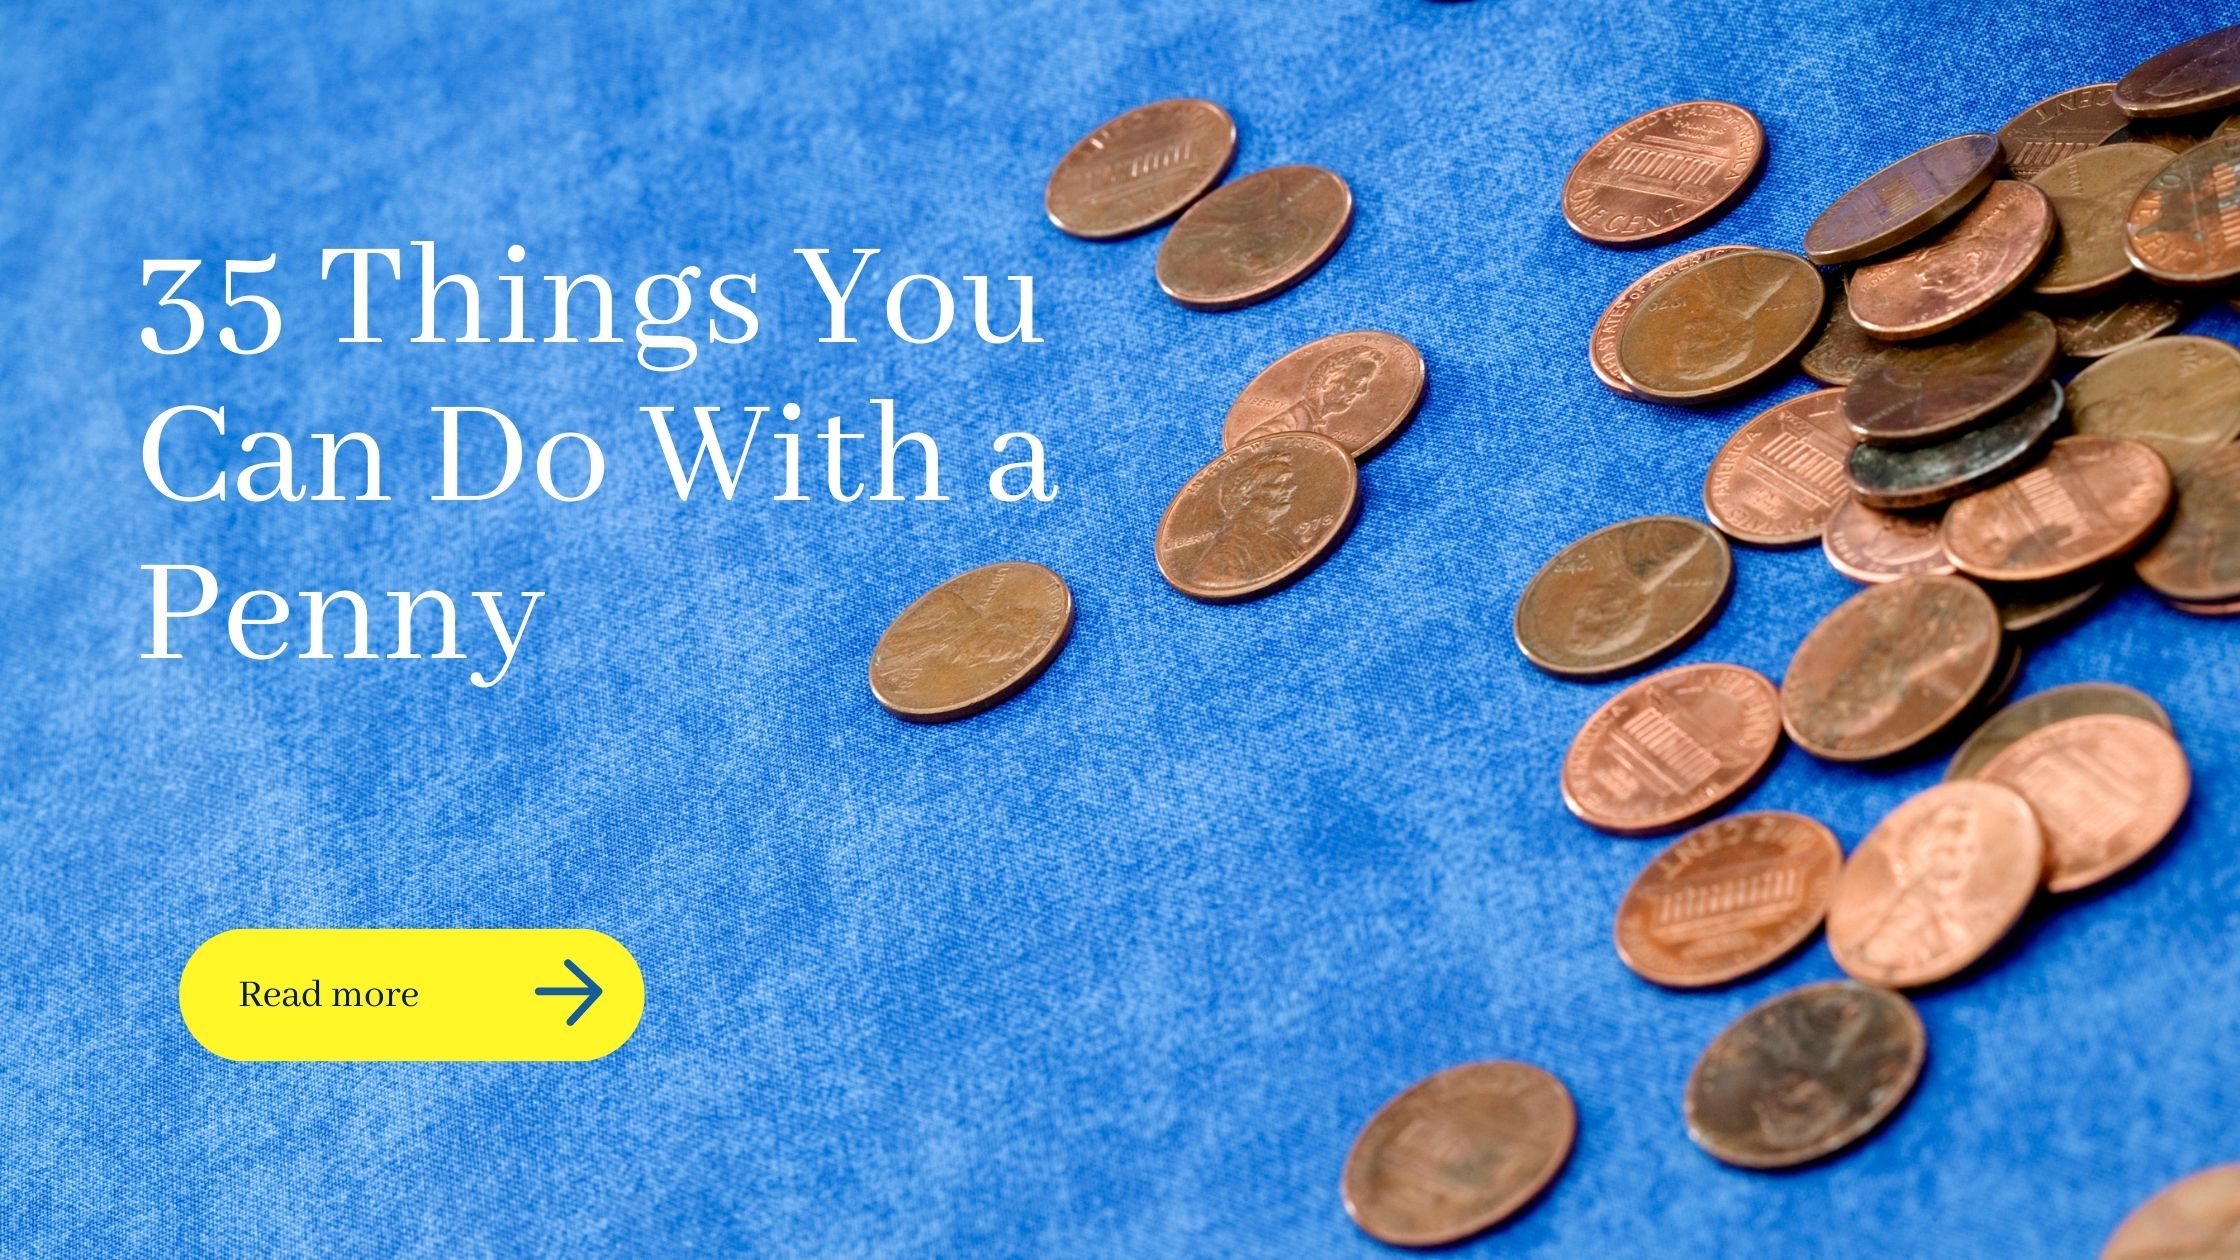 35 Things You Can Do With a Penny